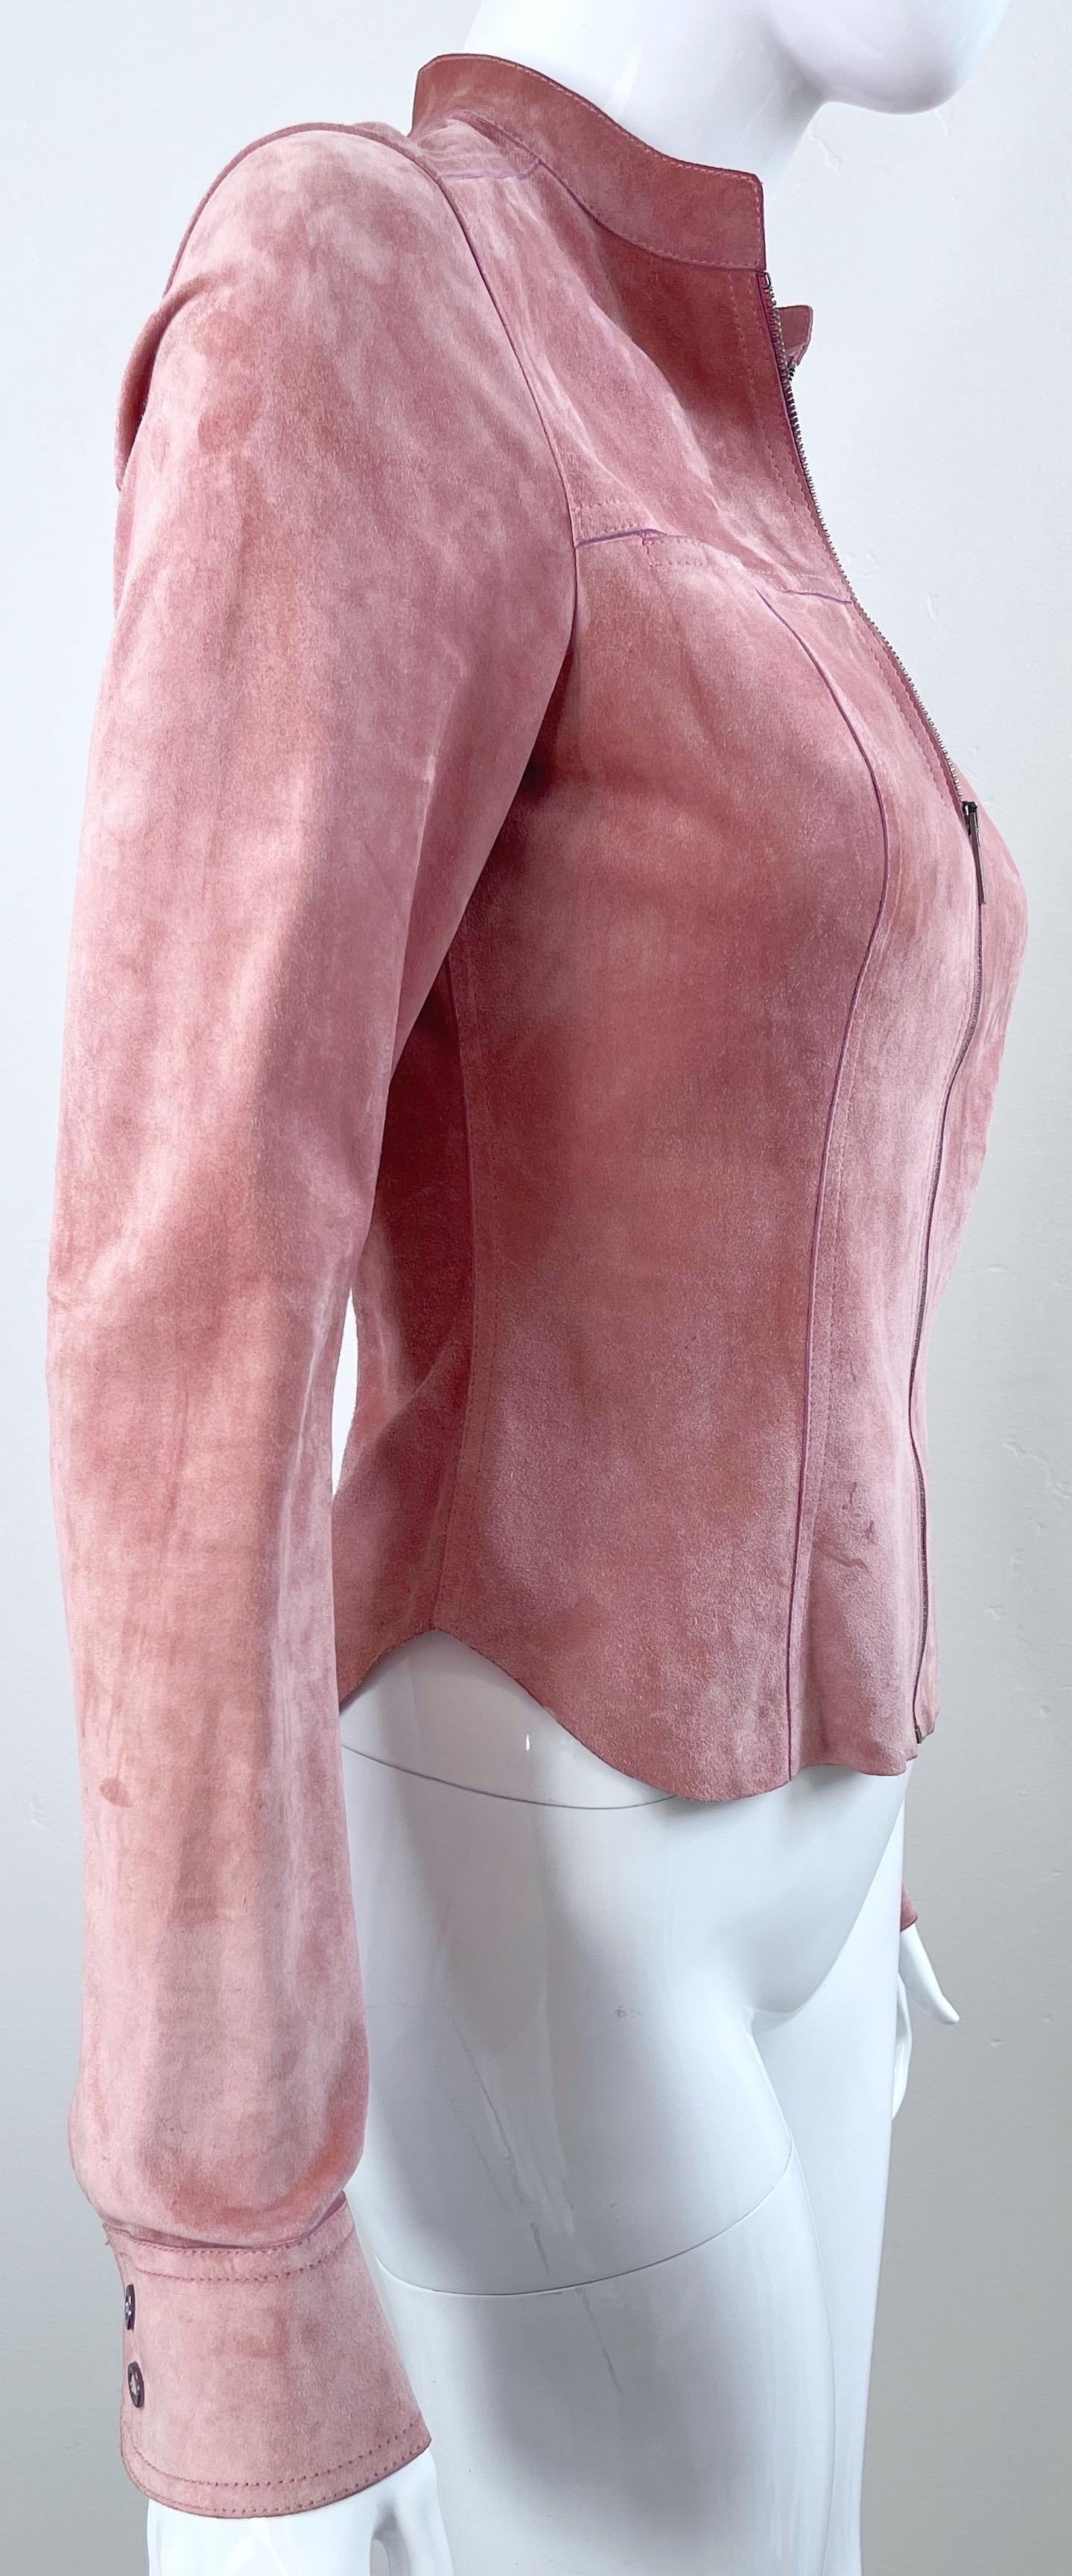 Gucci by Tom Ford Pink Mauve Dusty Rose Suede Leather Vintage Jacket  7